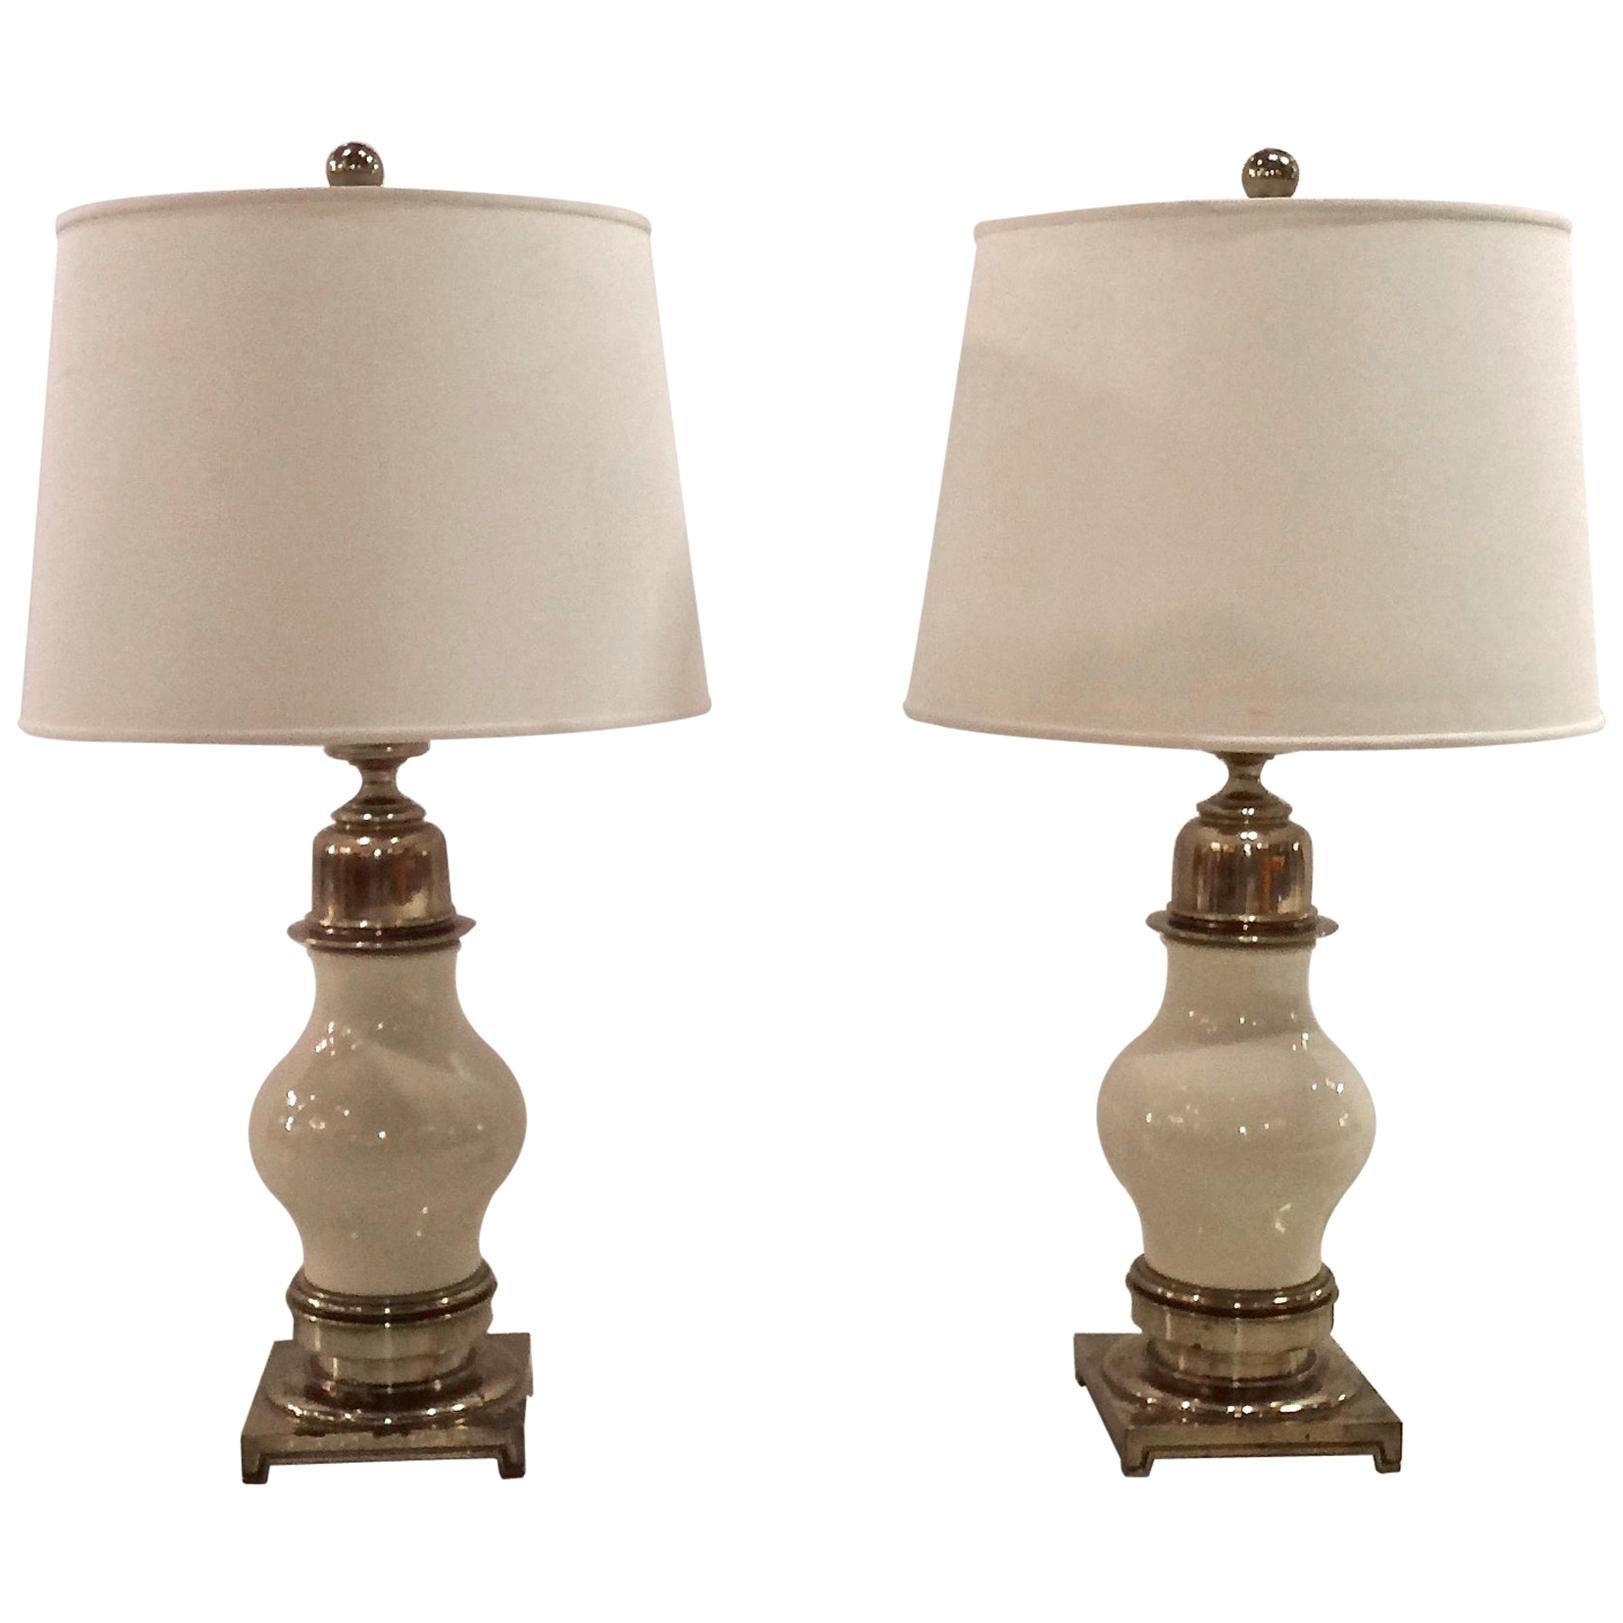 Impressive Pair of Midcentury Ceramic and Brass Table Lamps, by Stiffel For Sale